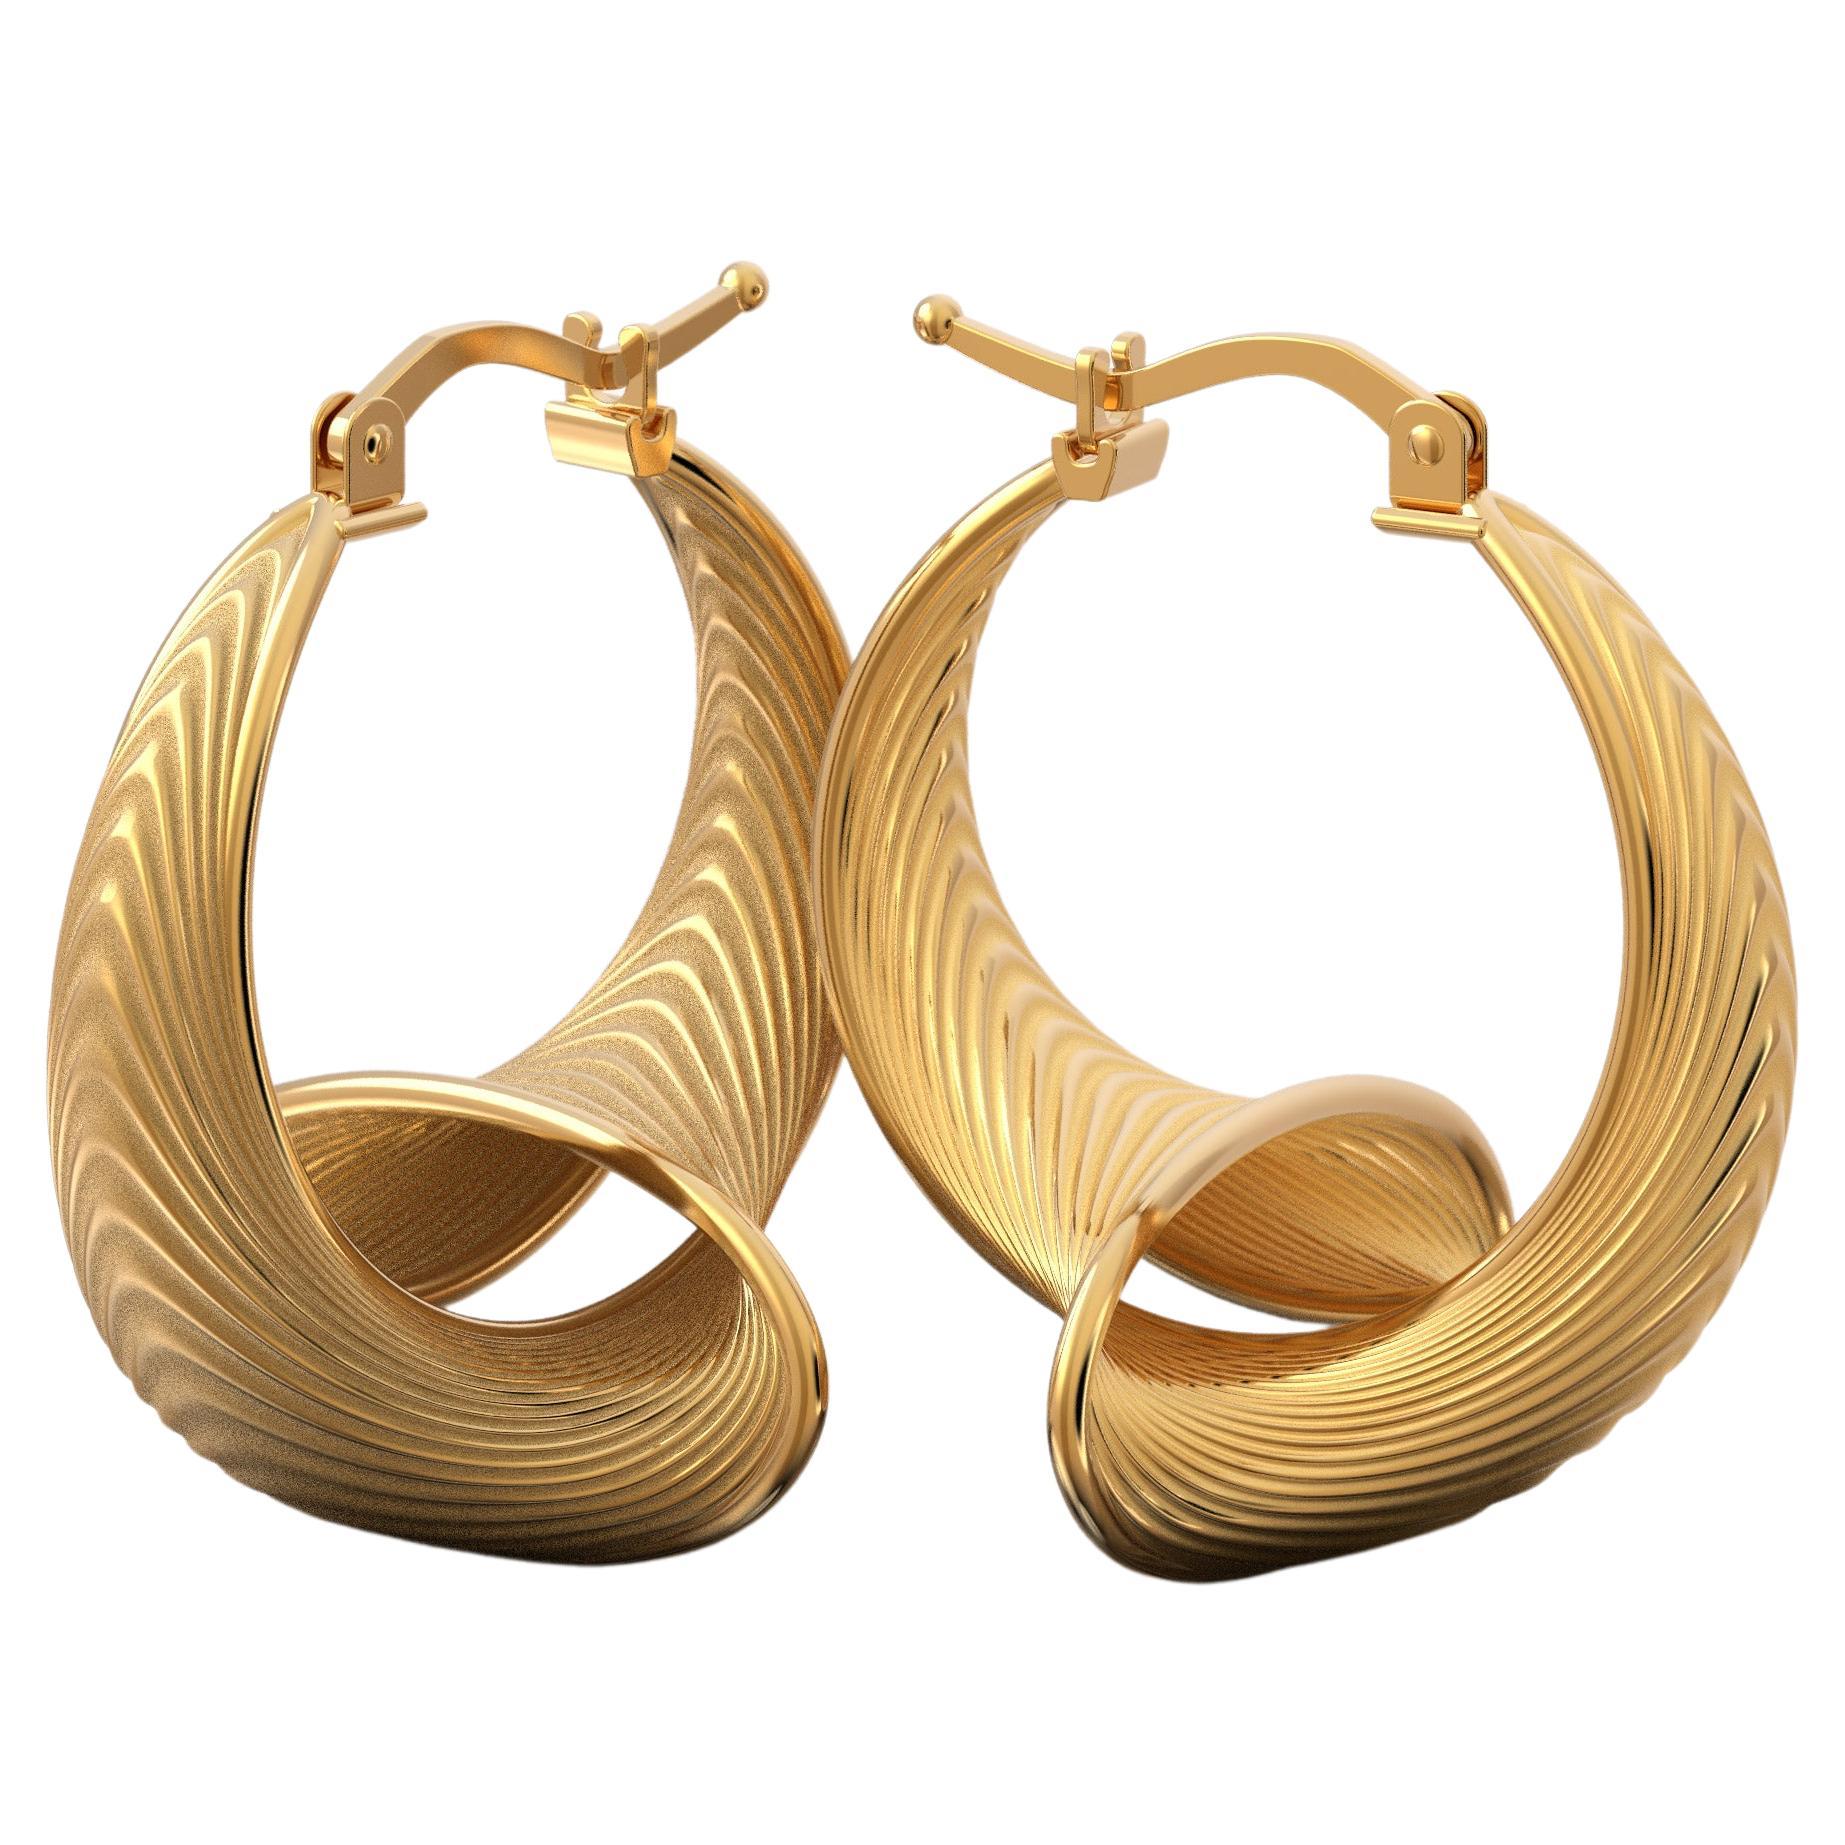 Elevate your style with our 24 mm Diameter Hoop Earrings in 14k Gold, a harmonious blend of Italian craftsmanship and modern innovation. These captivating earrings boast a striking fusion of classic beauty and futuristic design, handcrafted in